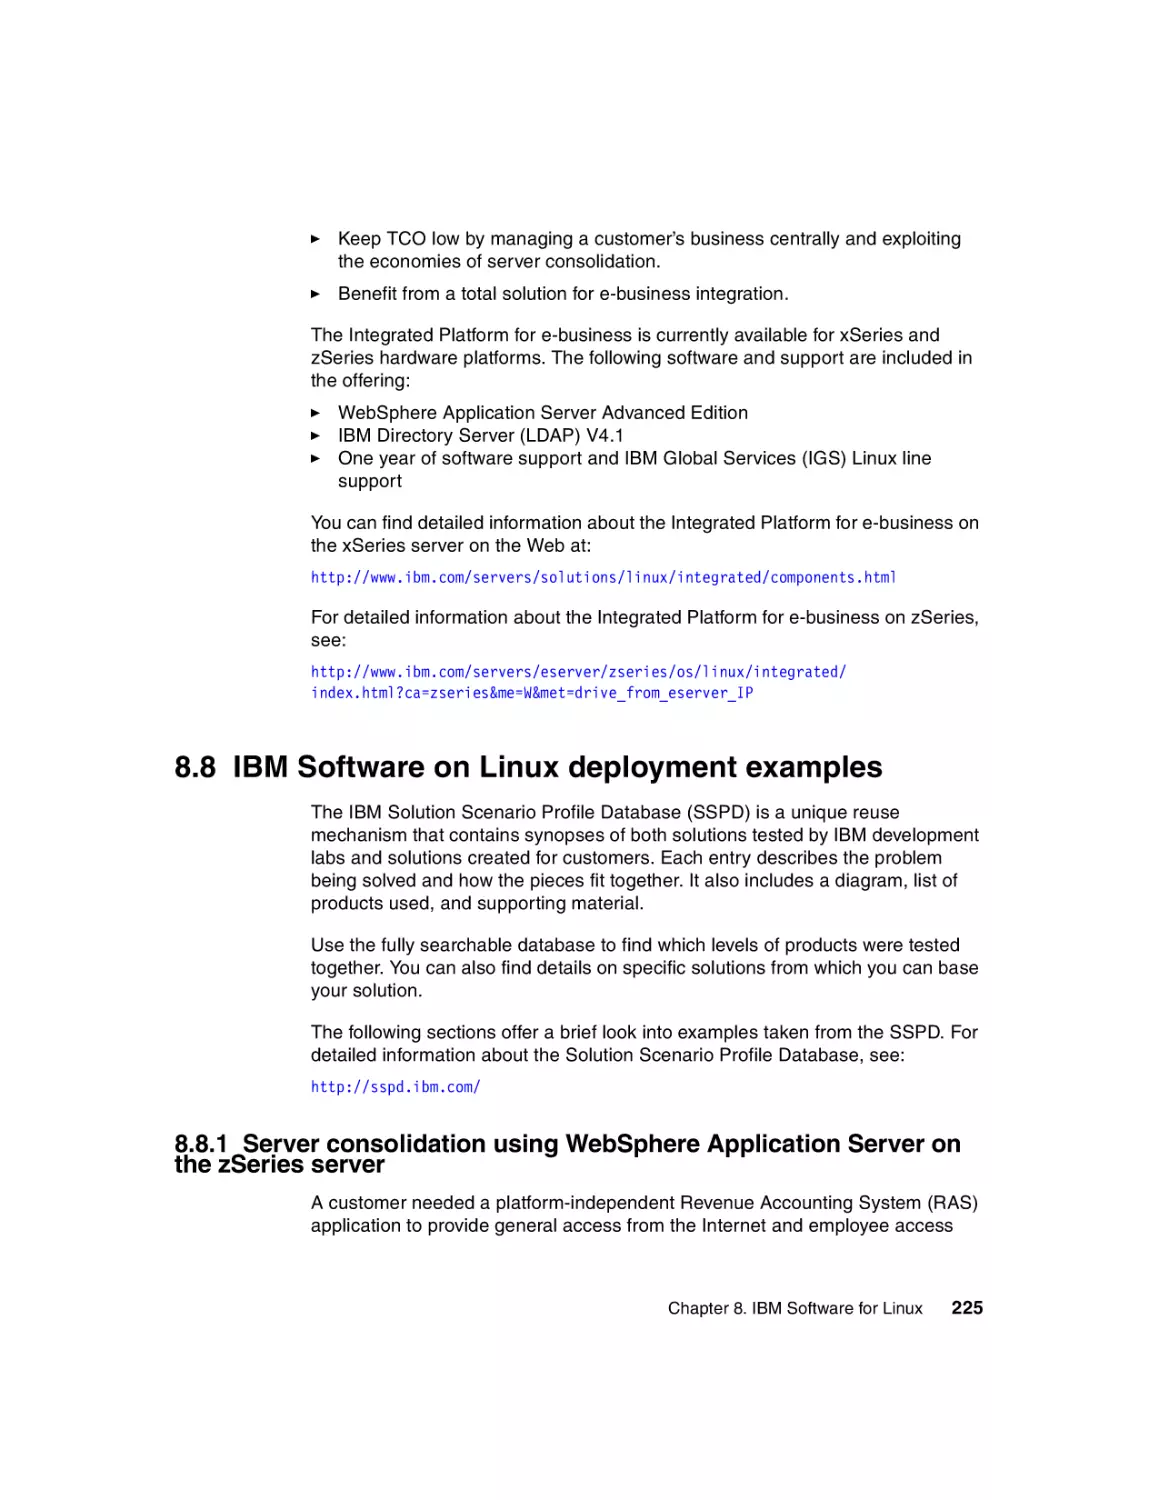 8.8 IBM Software on Linux deployment examples
8.8.1 Server consolidation using WebSphere Application Server on the zSeries server